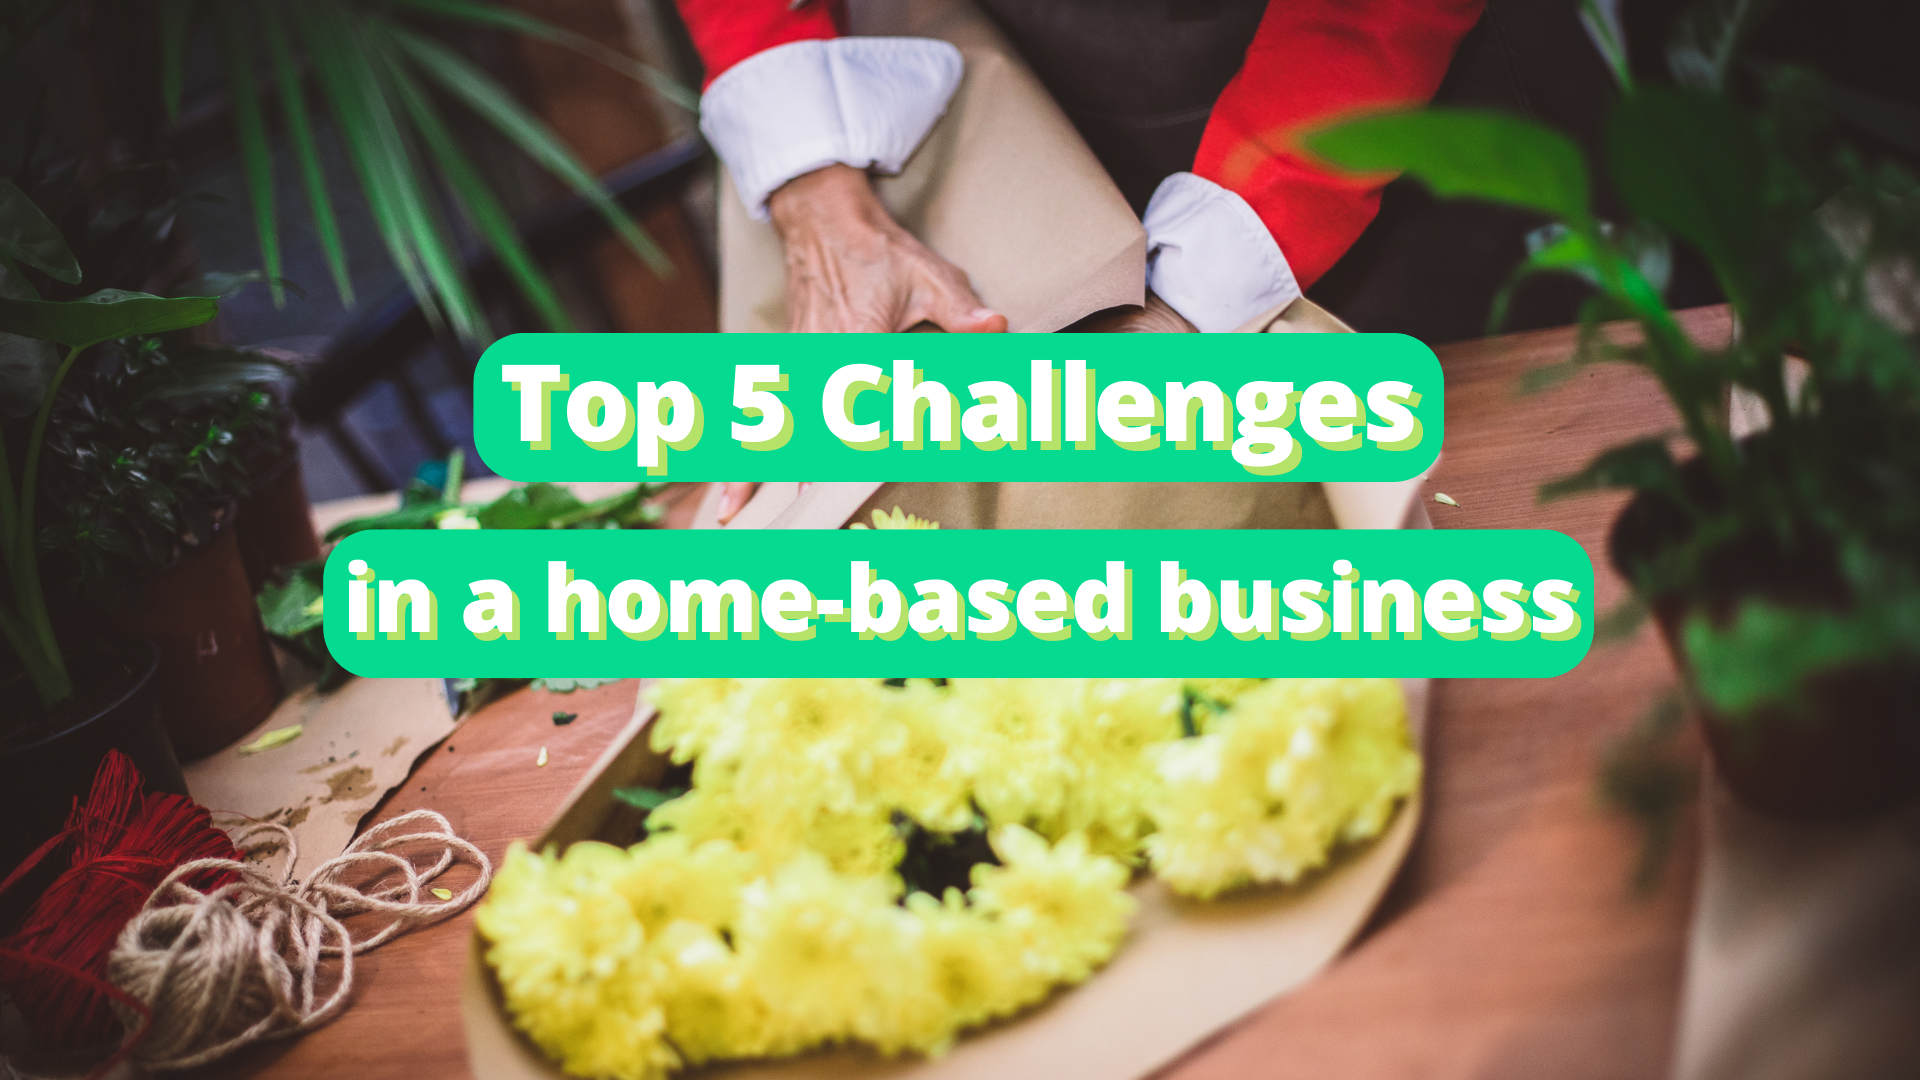 Top 5 challenges in a home based business